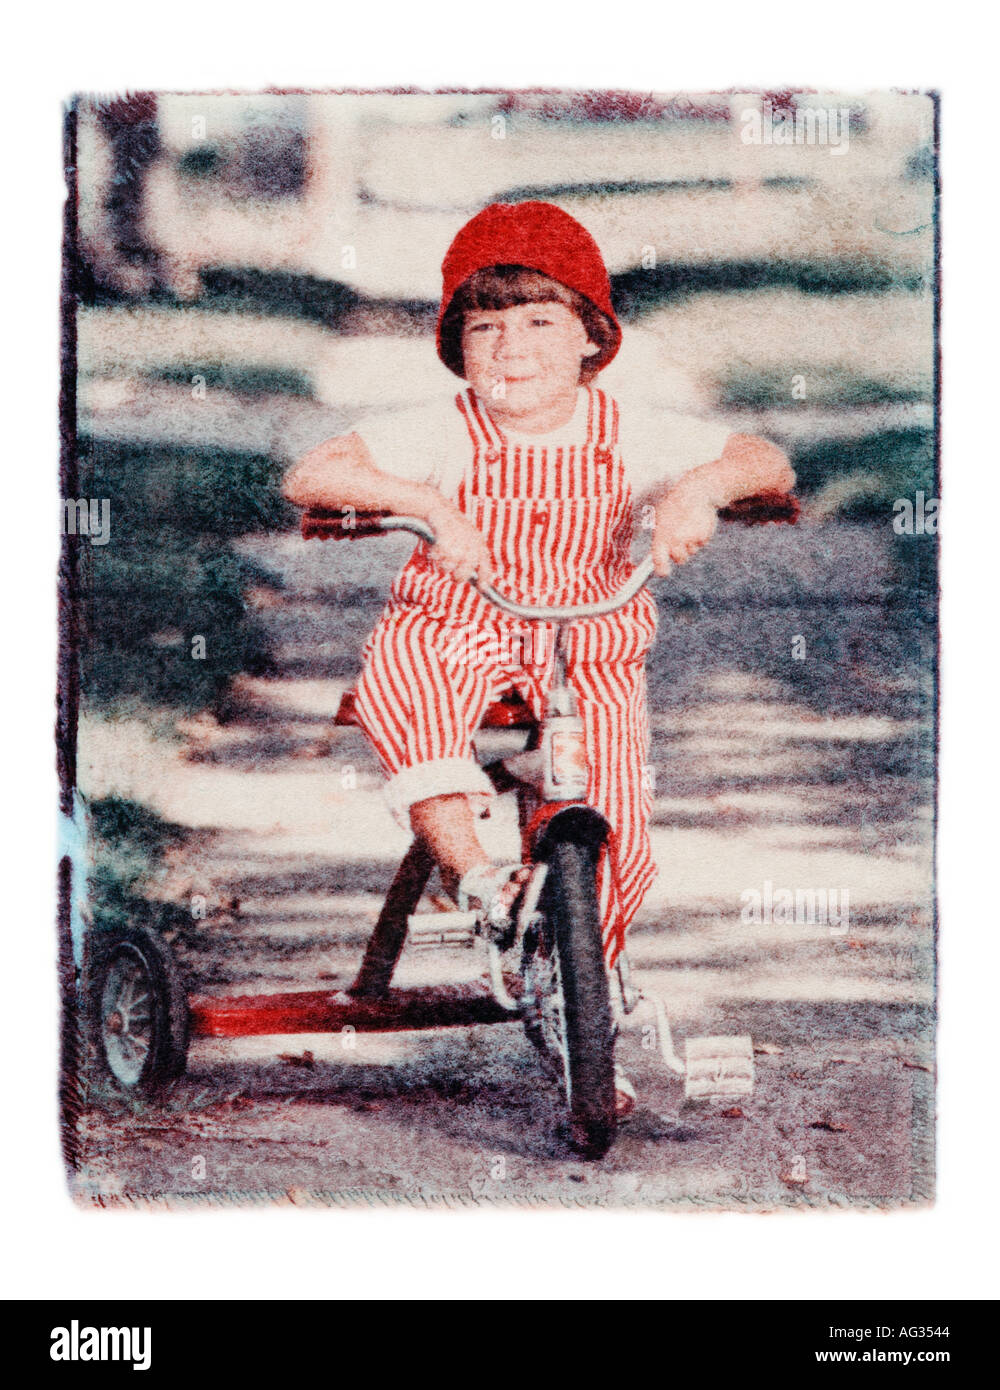 Polaroid transfer portrait of young girl on tricycle Stock Photo